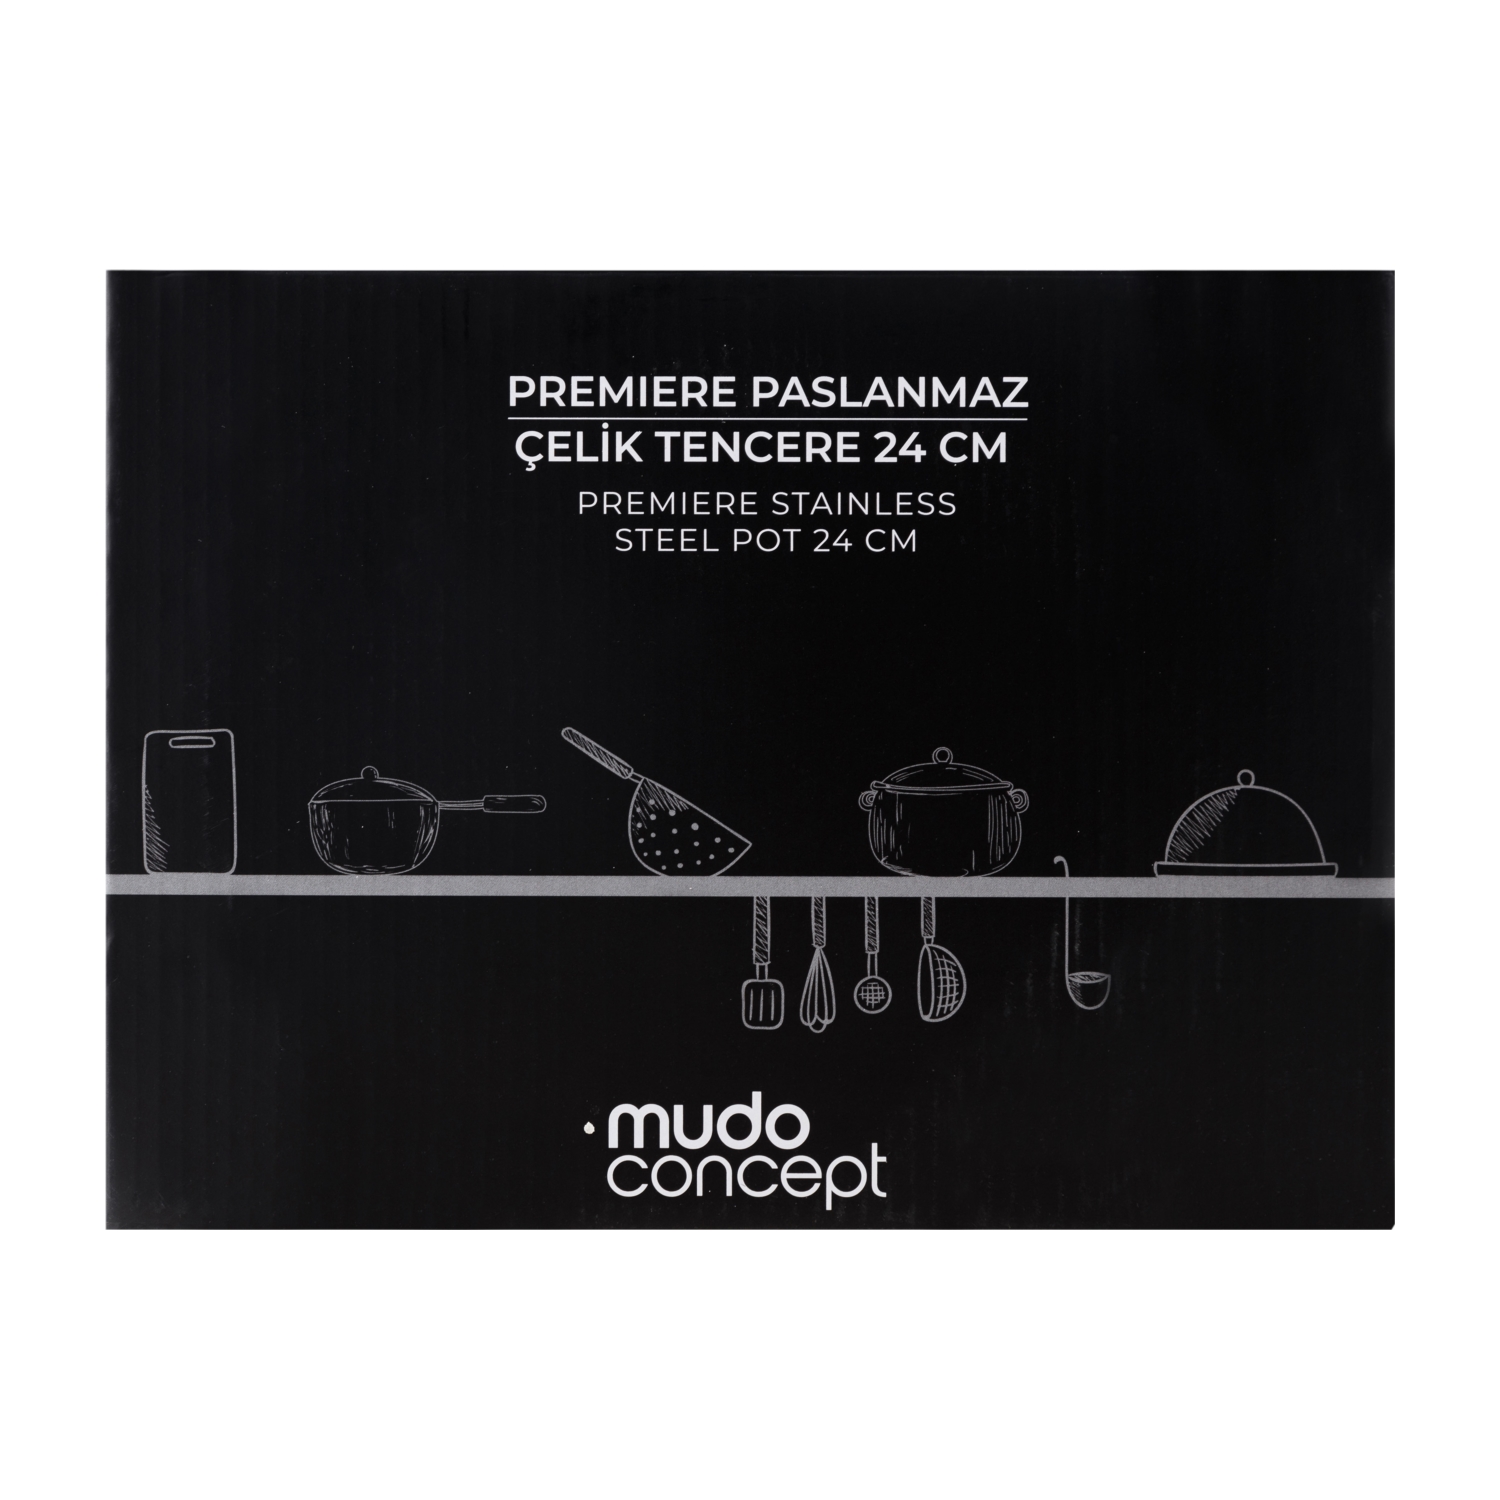 PREMIERE STAINLESS STEEL BASIK TENCERE 24 CM 